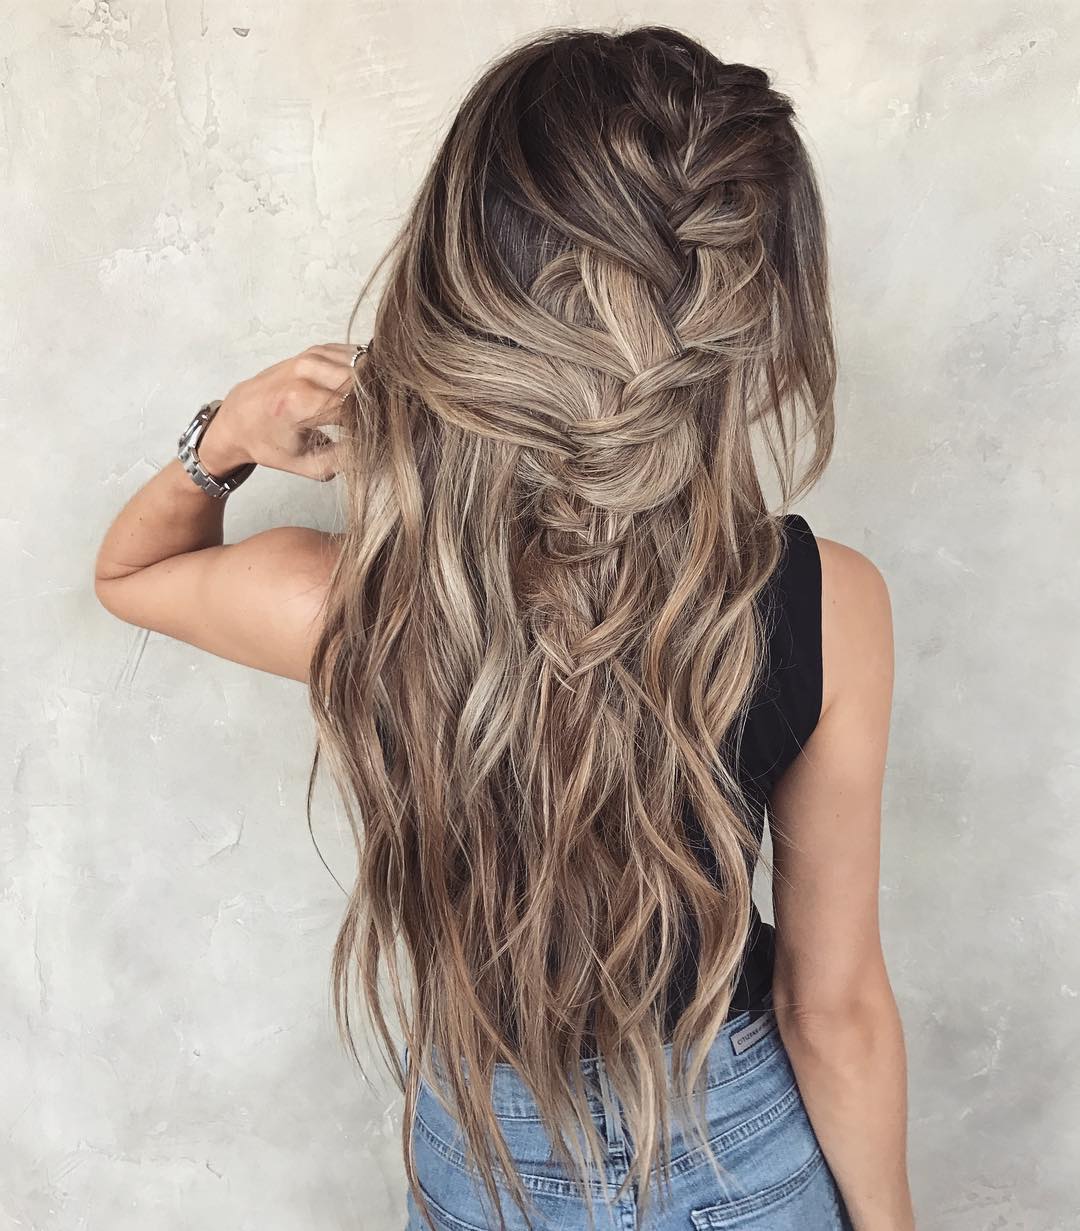 Messy Braided Hairstyle with Long Hair, Women Long Hairstyles for Summer